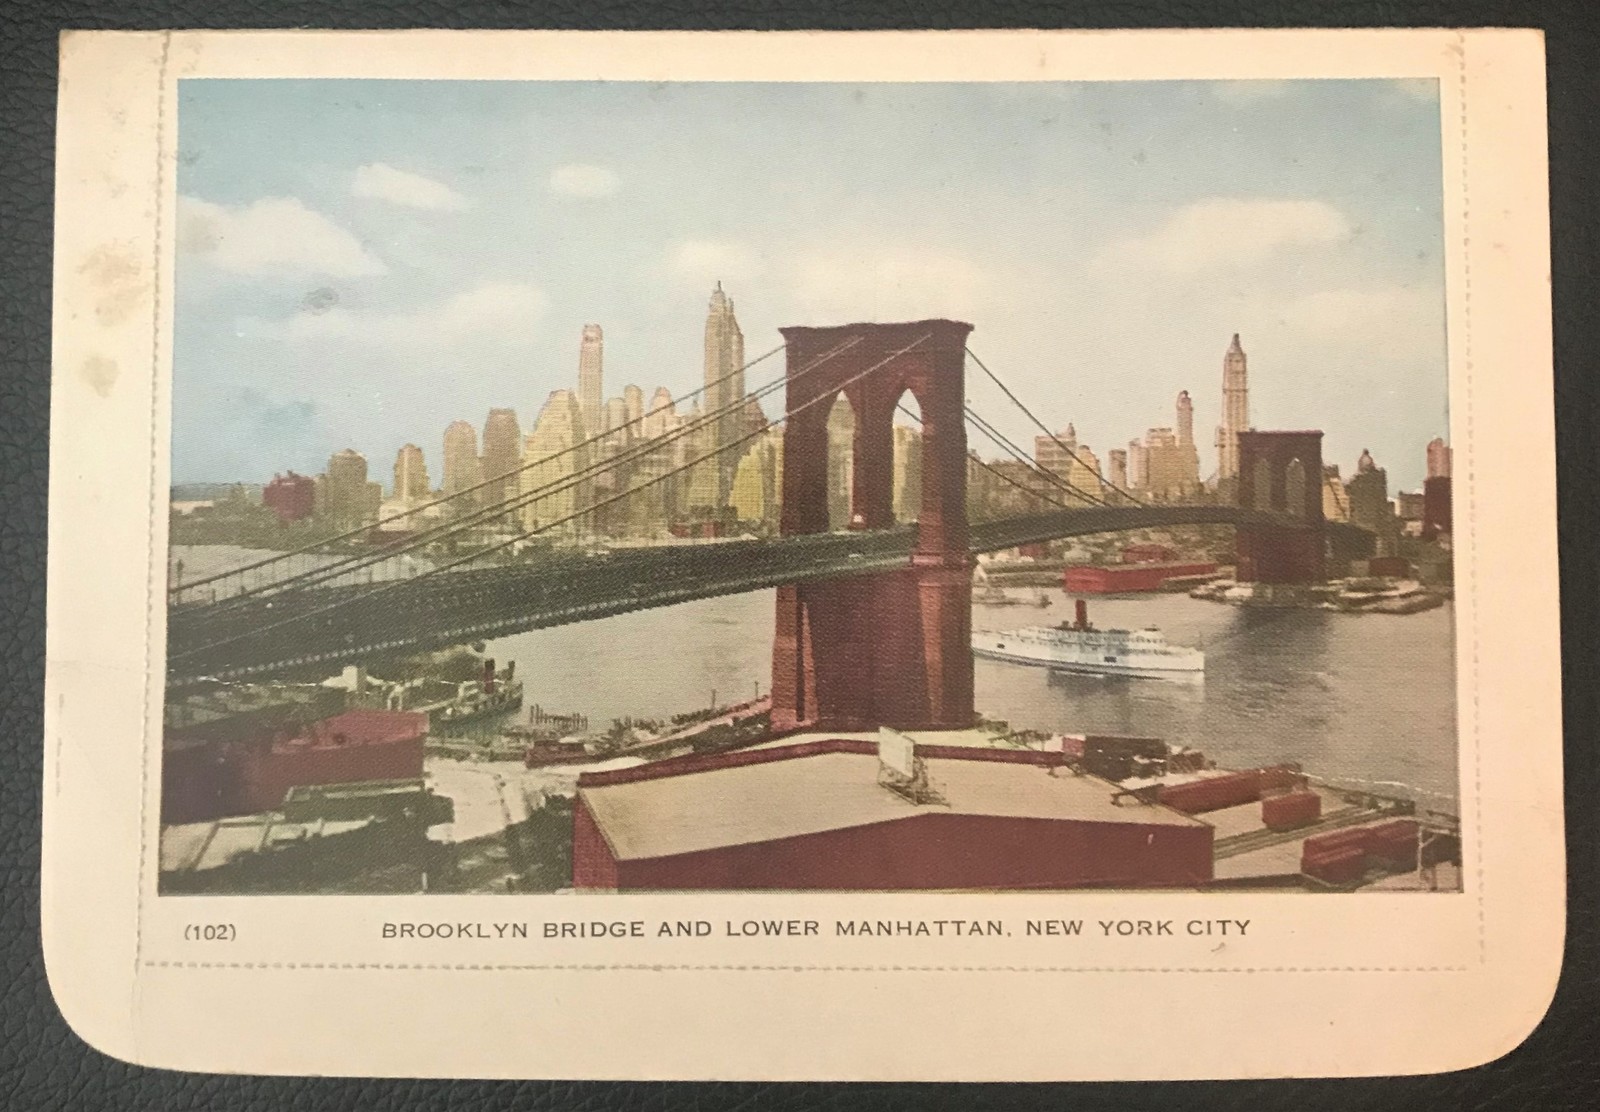 Primary image for 1929 Brooklyn Bridge Punch-Out Letter Card